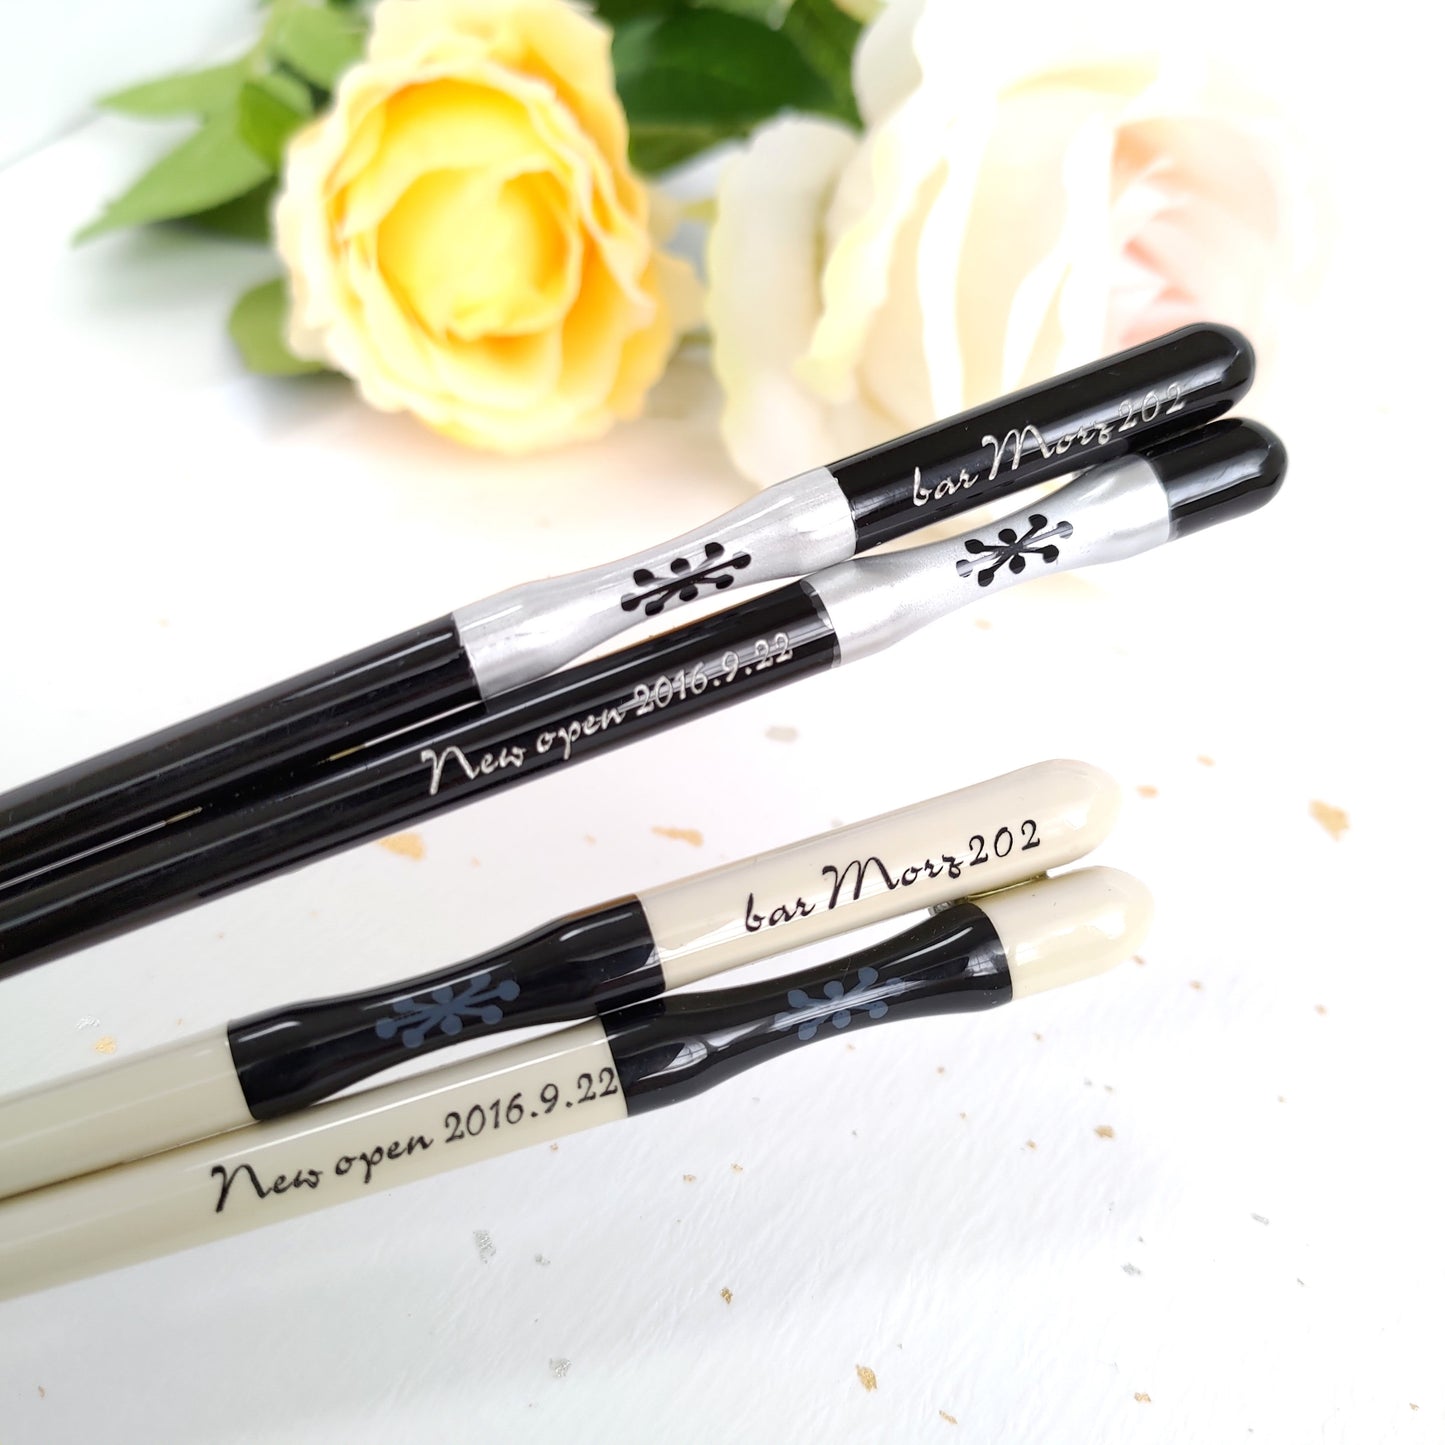 Heart of the forest Japanese chopsticks black white - DOUBLE PAIR WITH ENGRAVED WOODEN BOX SET